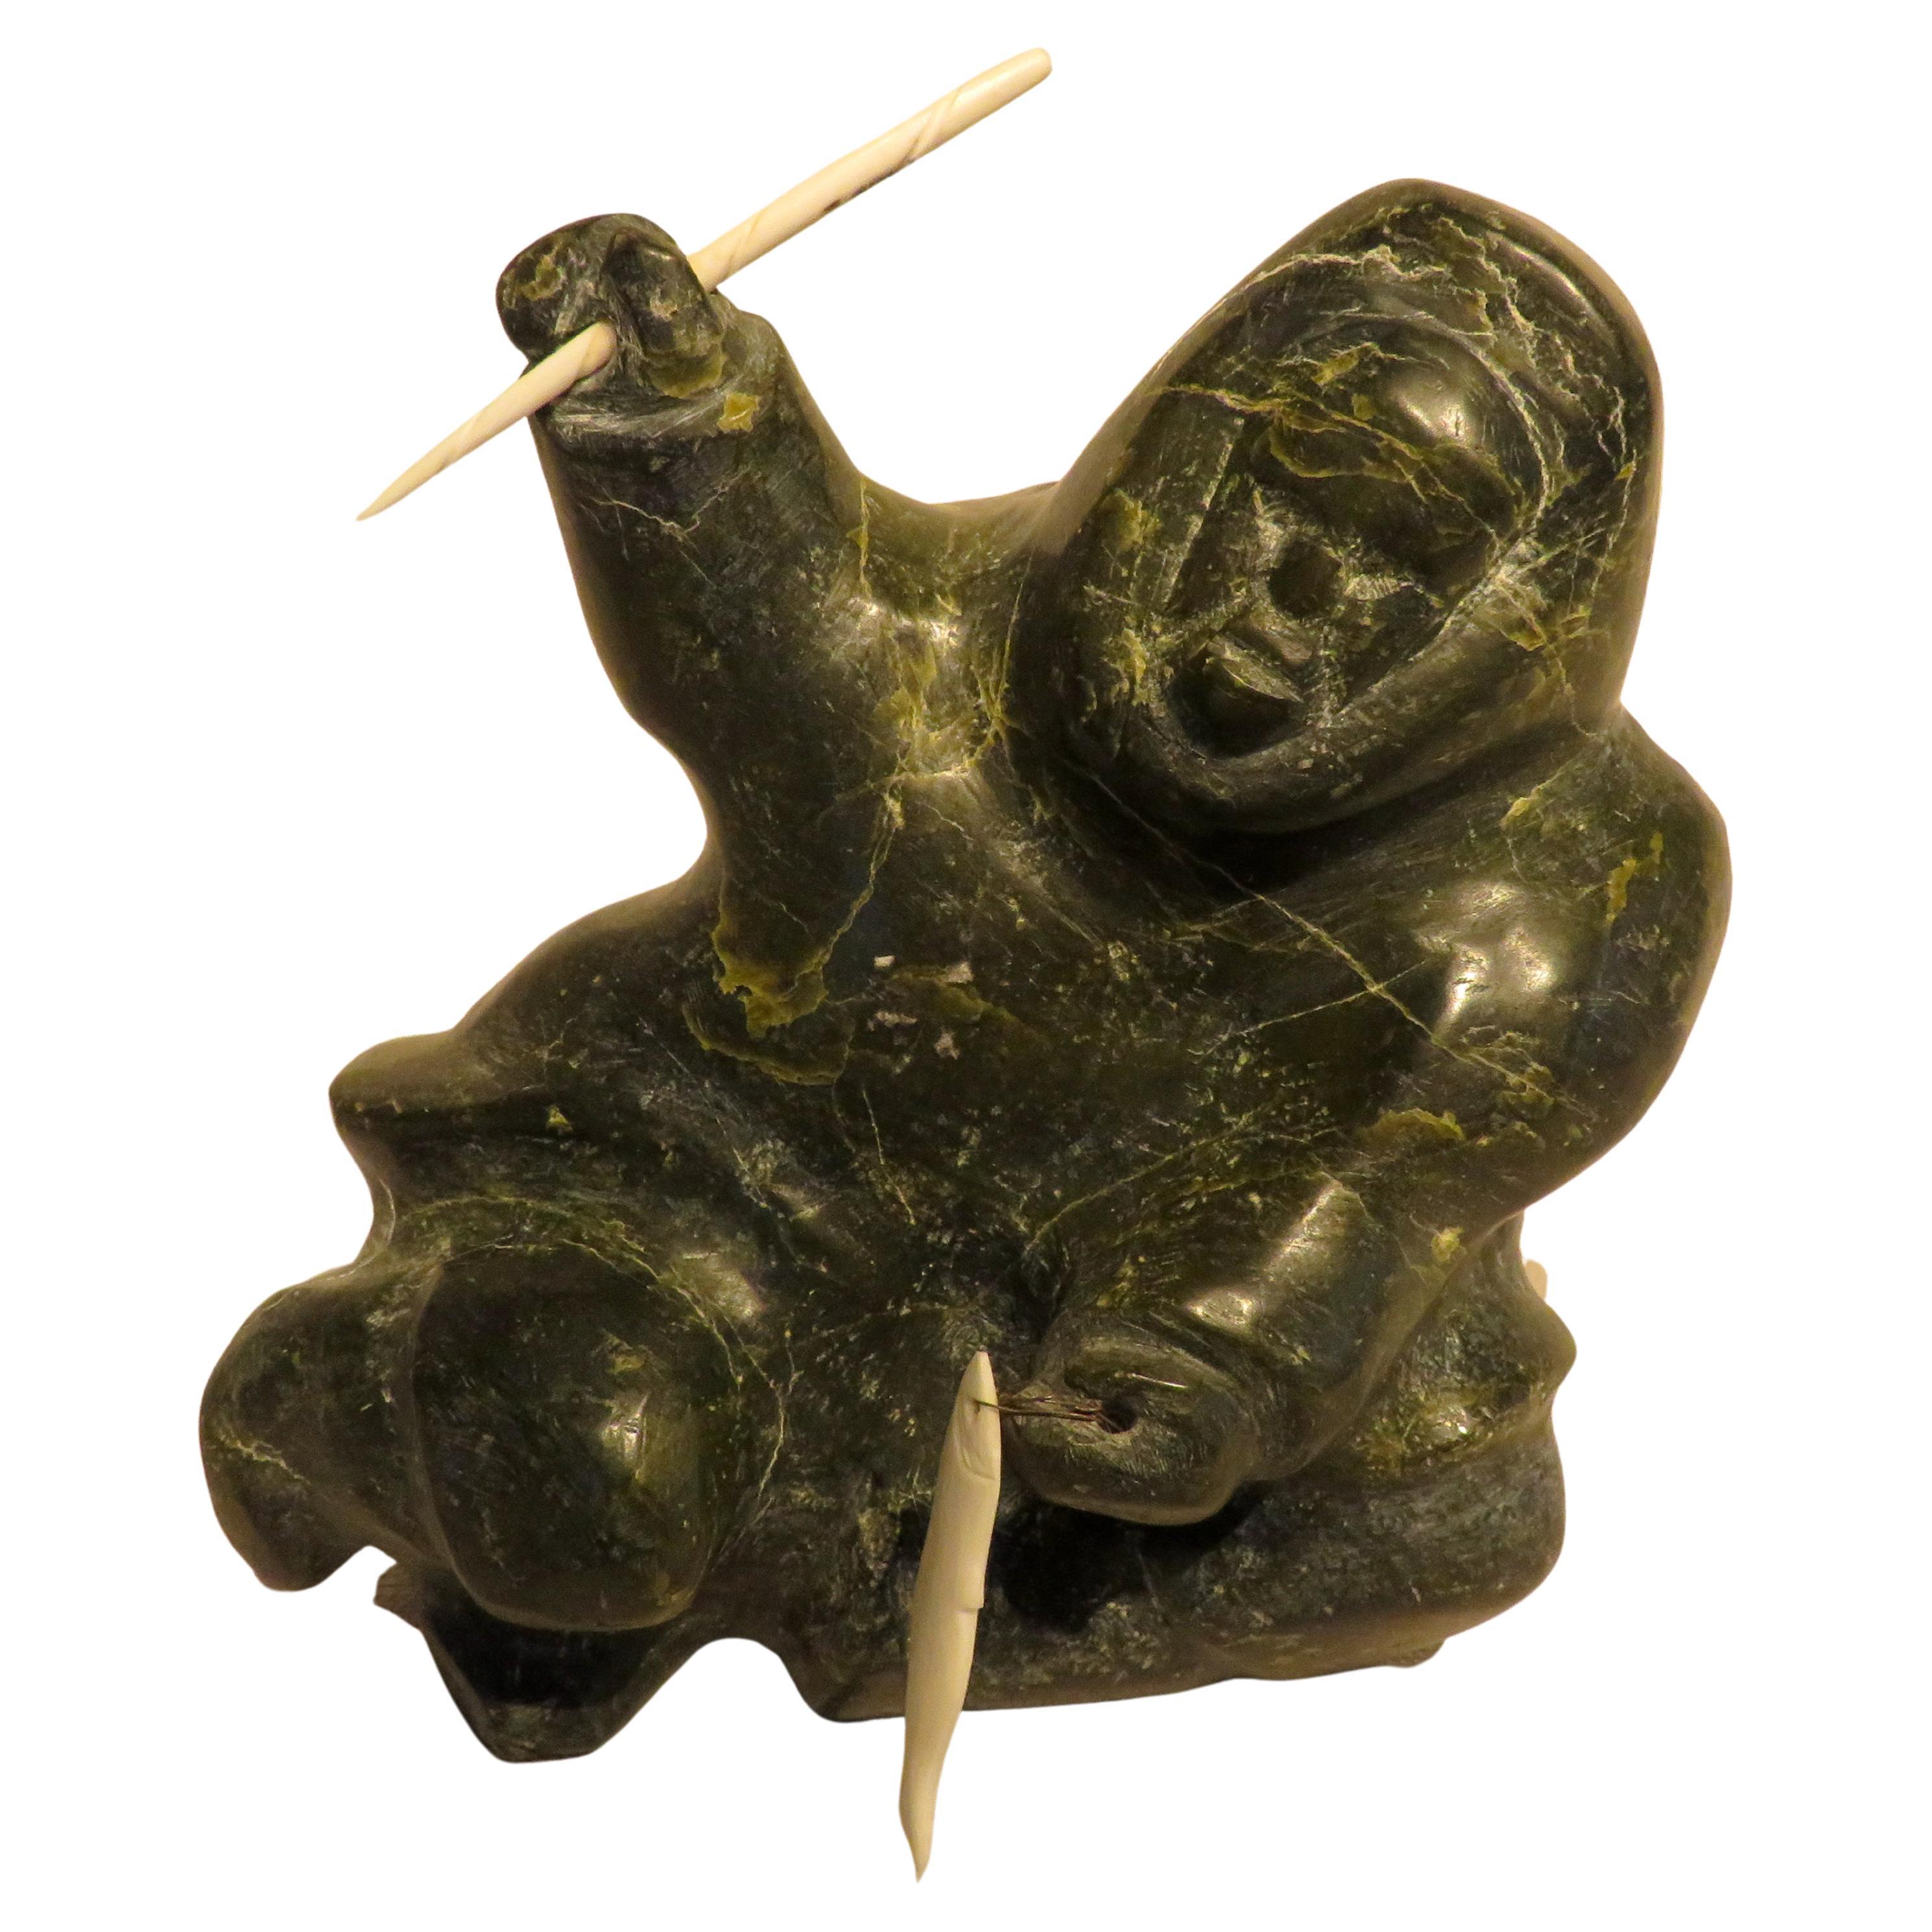 Carved Soapstone Sculpture of a Seated Inuit Holding a Bone Narwhal Tusk & Fish For Sale